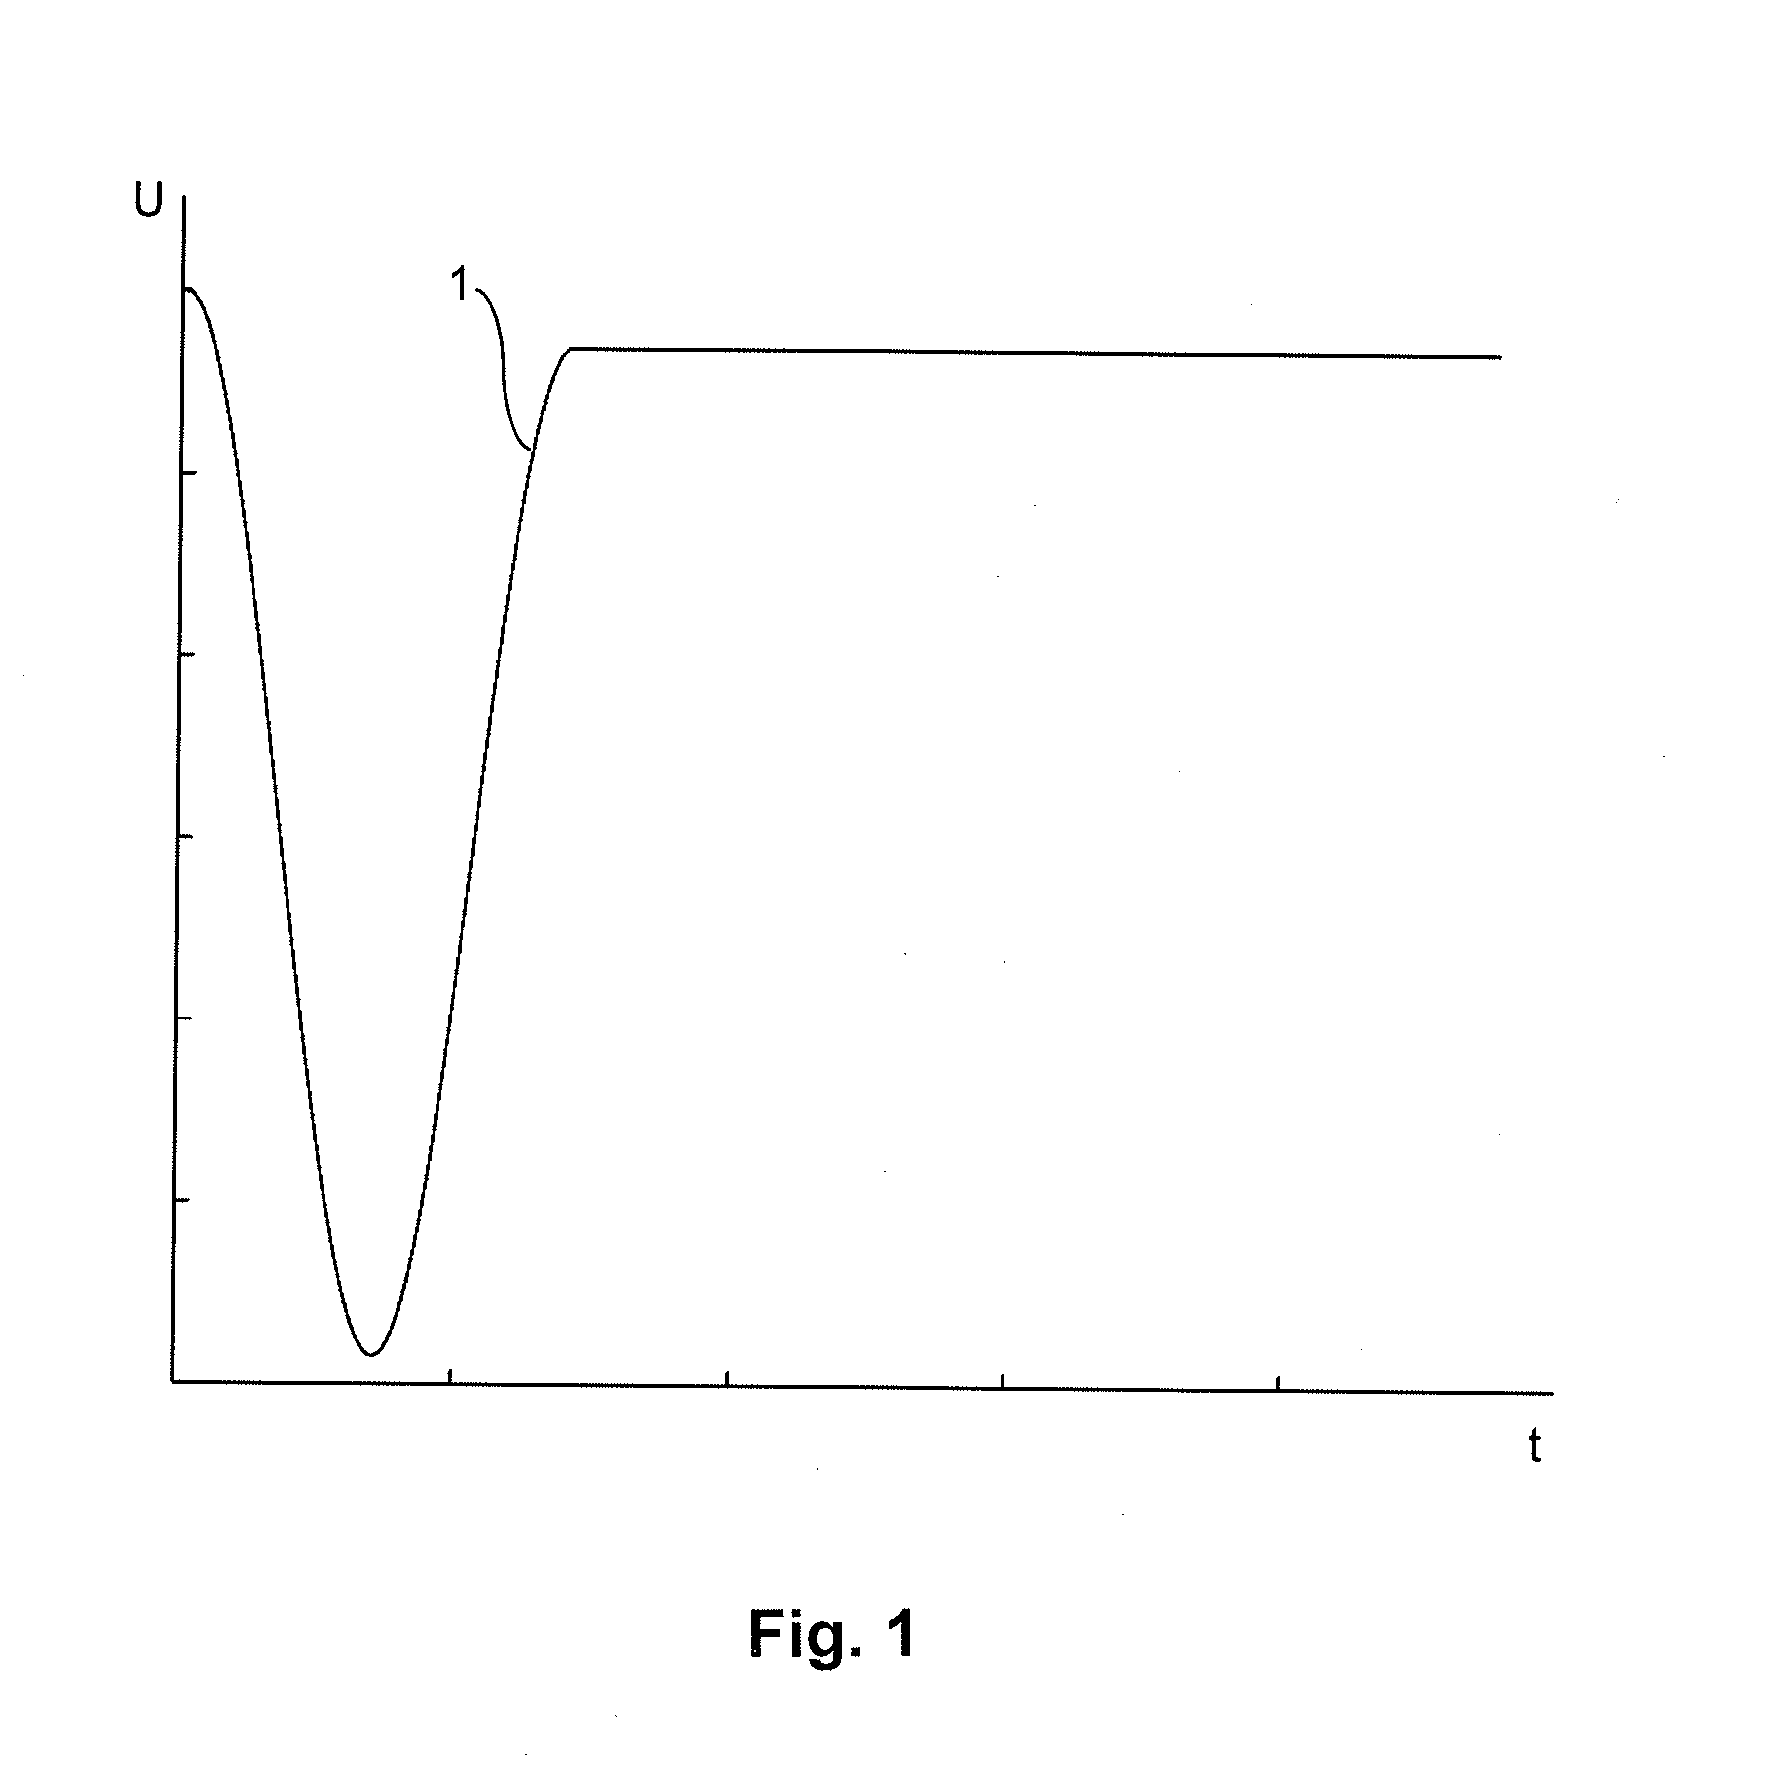 Methods for controlling a magnetic stimulation device